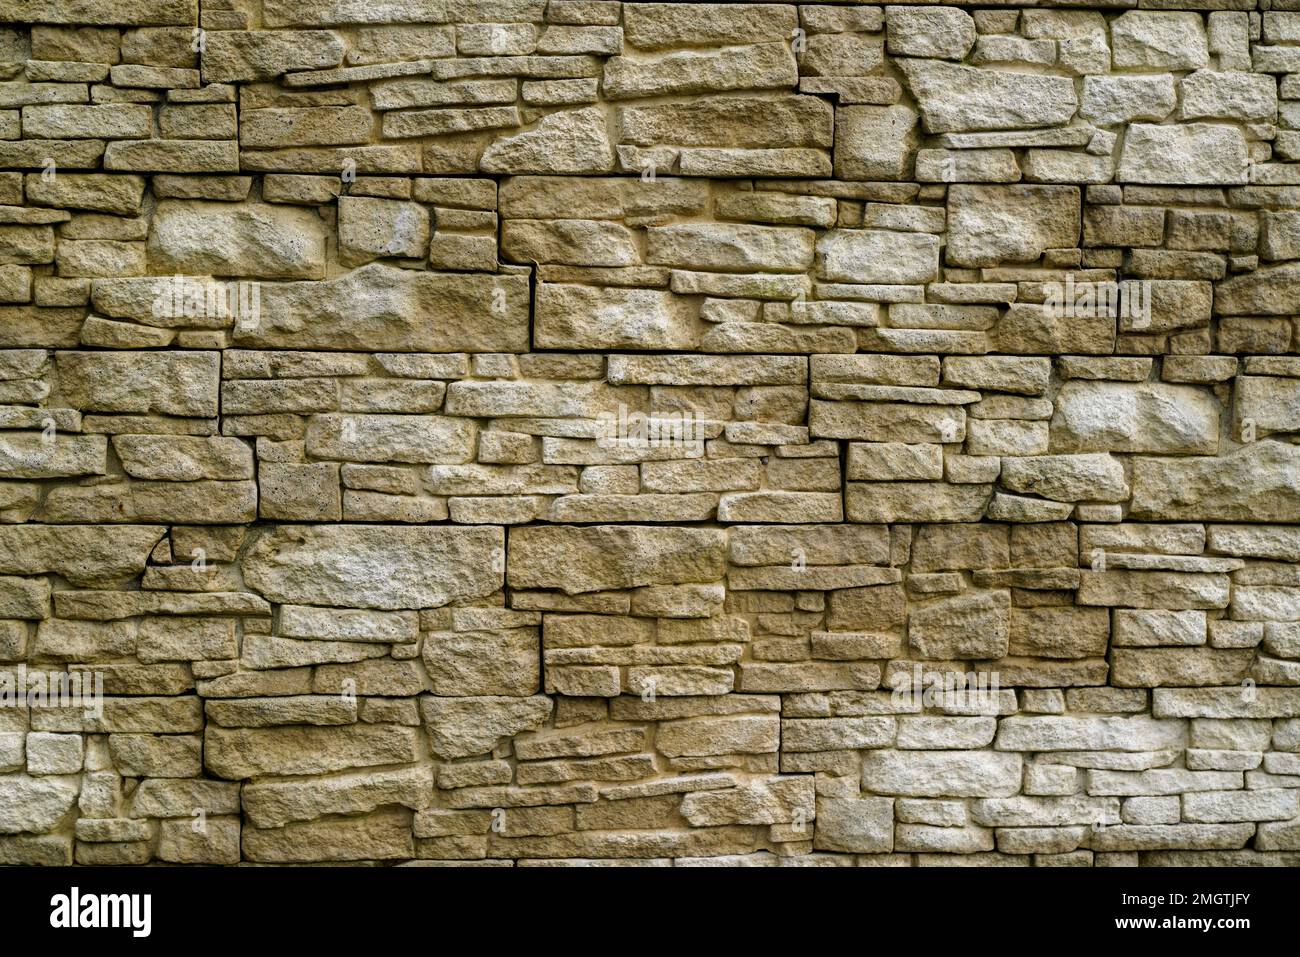 https://c8.alamy.com/comp/2MGTJFY/stone-pebbles-old-wall-vintage-texture-background-brick-siding-different-sized-stones-2MGTJFY.jpg